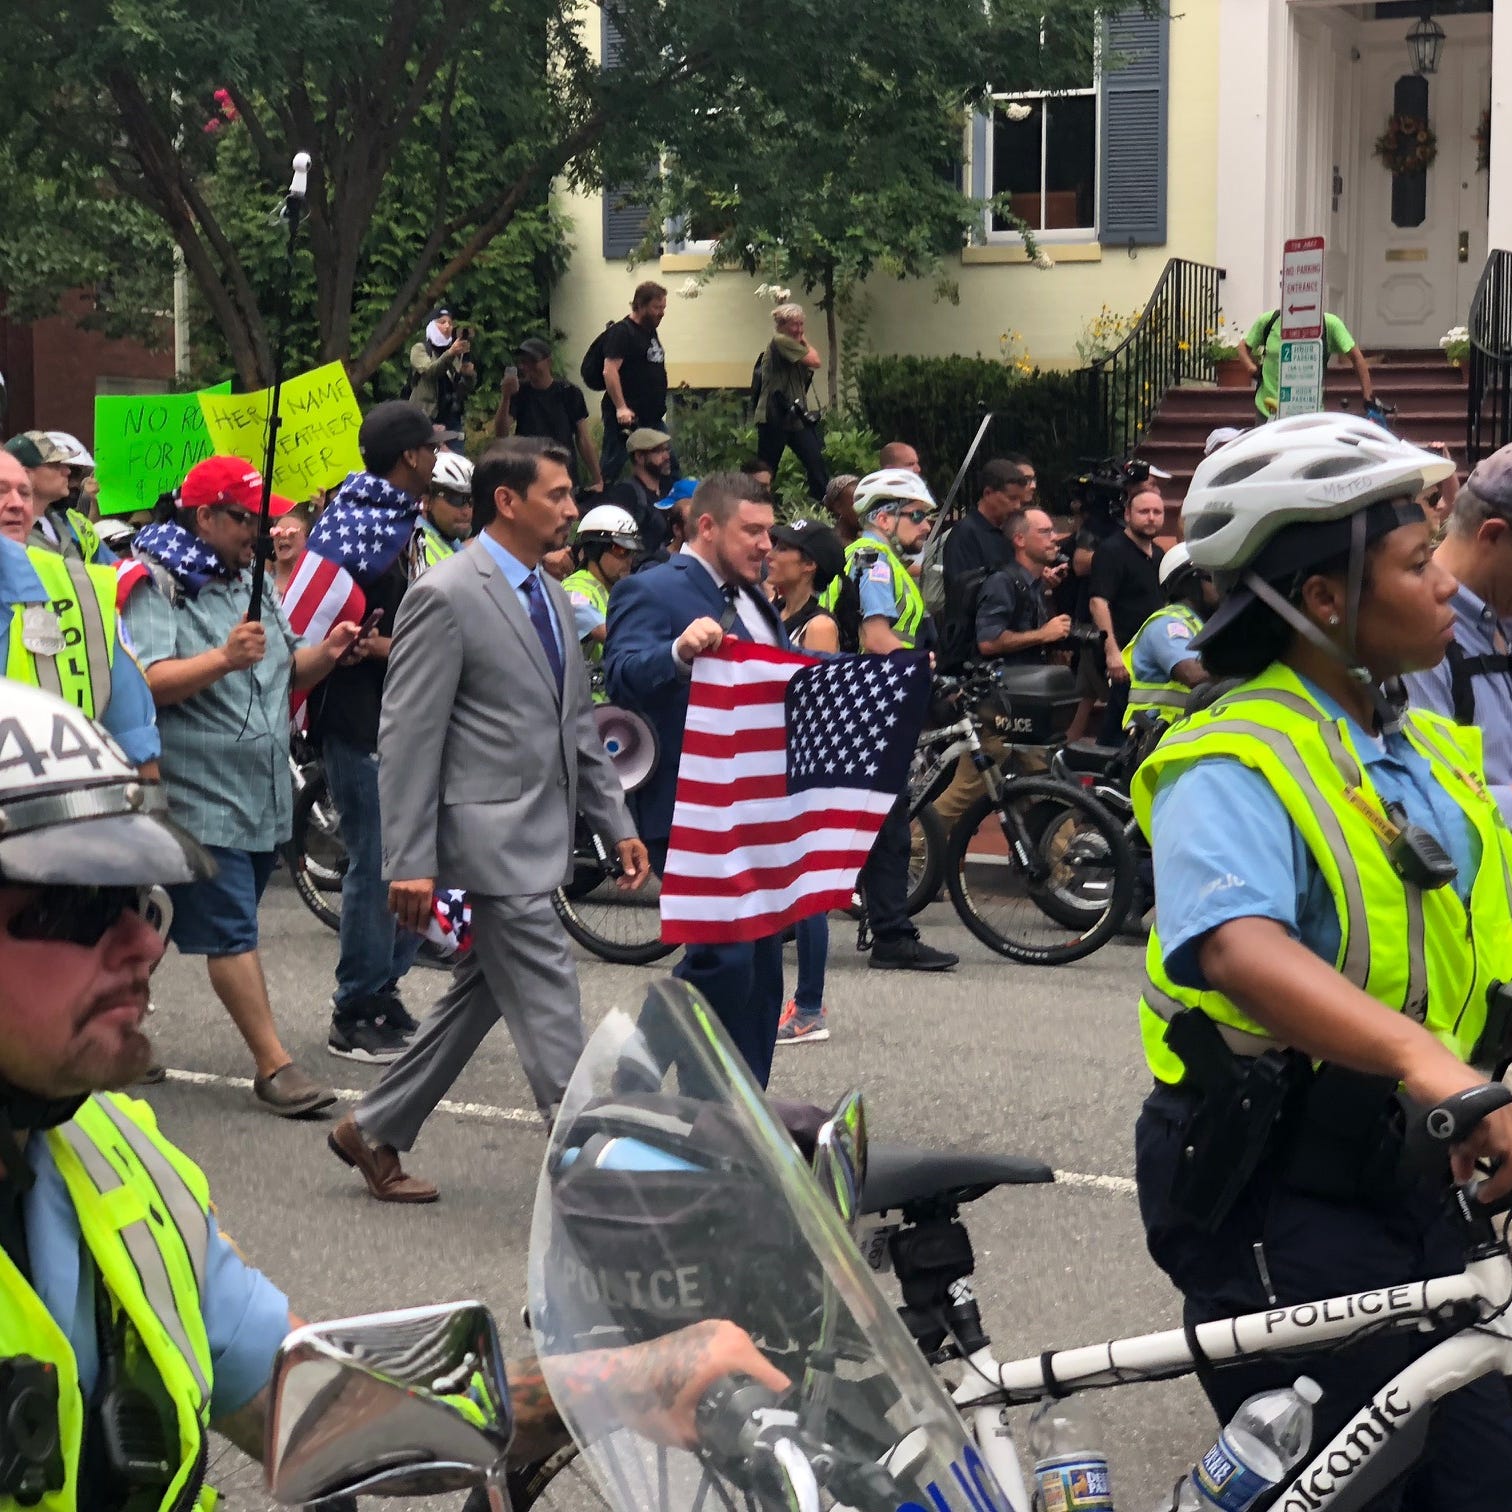 Unite the Right organizer Jason Kessler walks in Washington, DC. They arrived to dozens of counterprotesters and a scuffle broke out that had to be broken up by police. There are only about a dozen, maybe slightly more, of these white nationalists. P